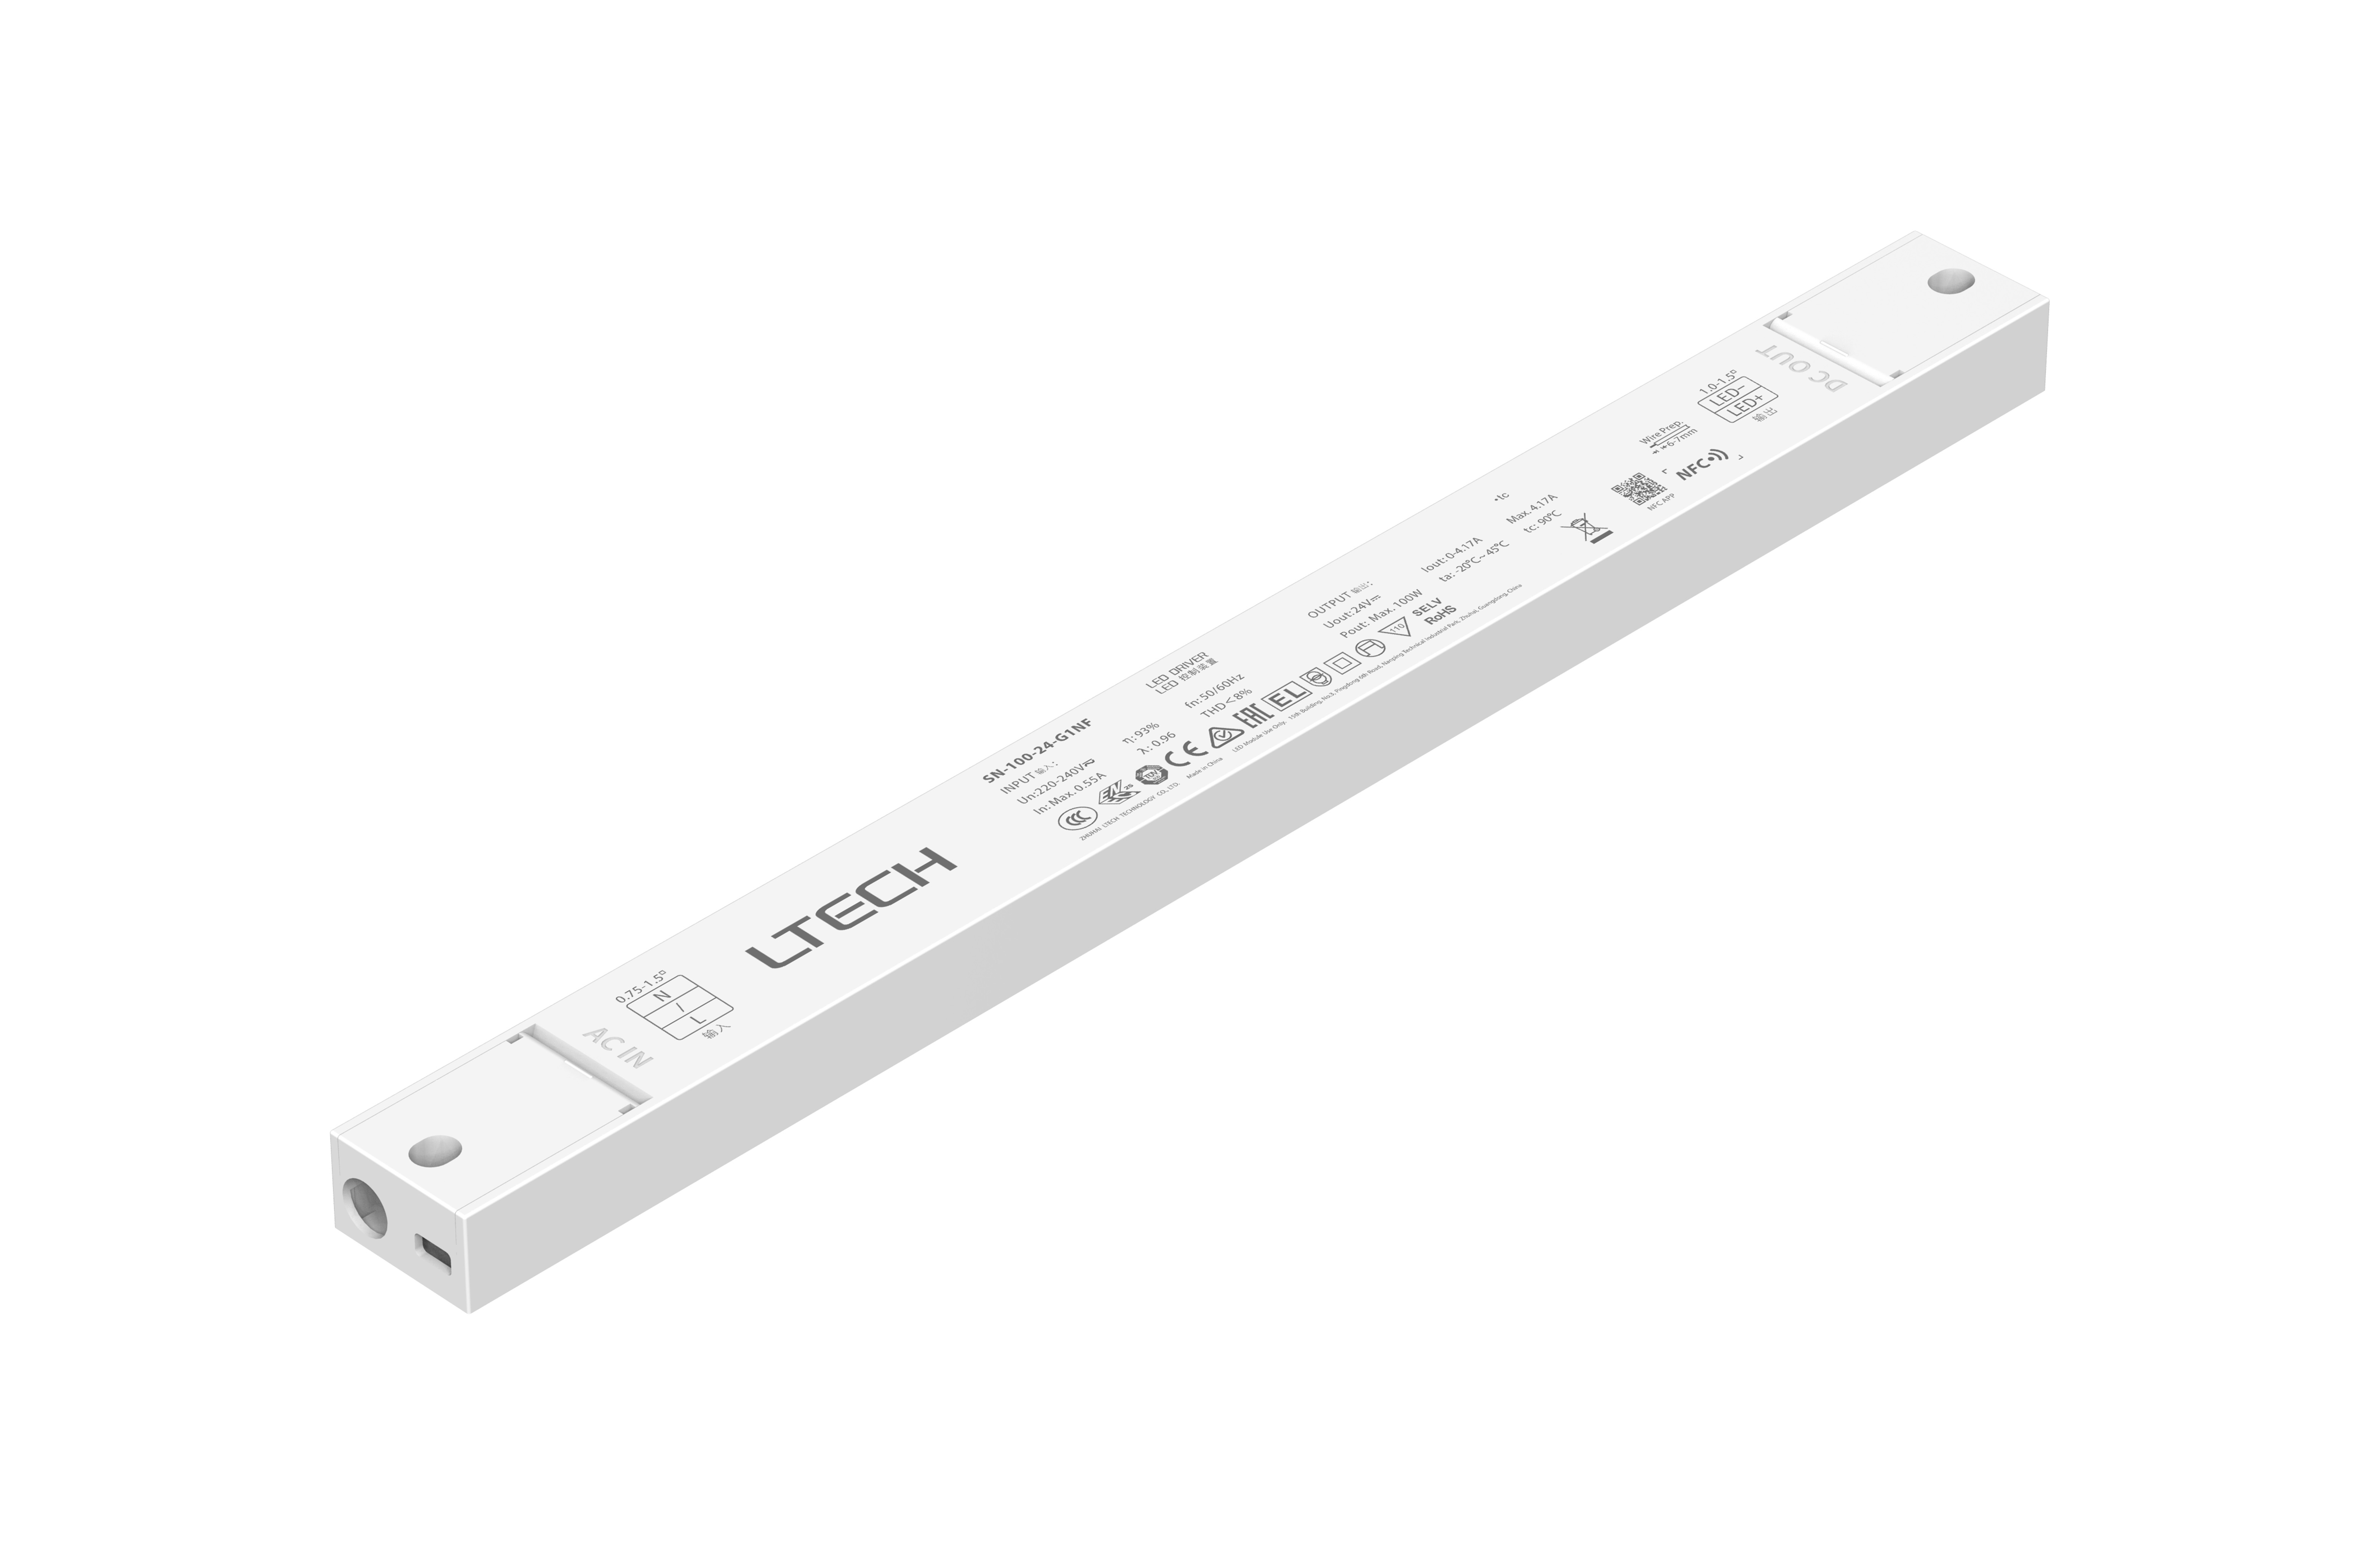 SN-100-24-G1NF-NFC  Intelligent Constant Current NFC ON/OFF LED Driver;  100W; 24VDC 4.17A ; 220-240Vac; IP20; 5yrs Warrenty.